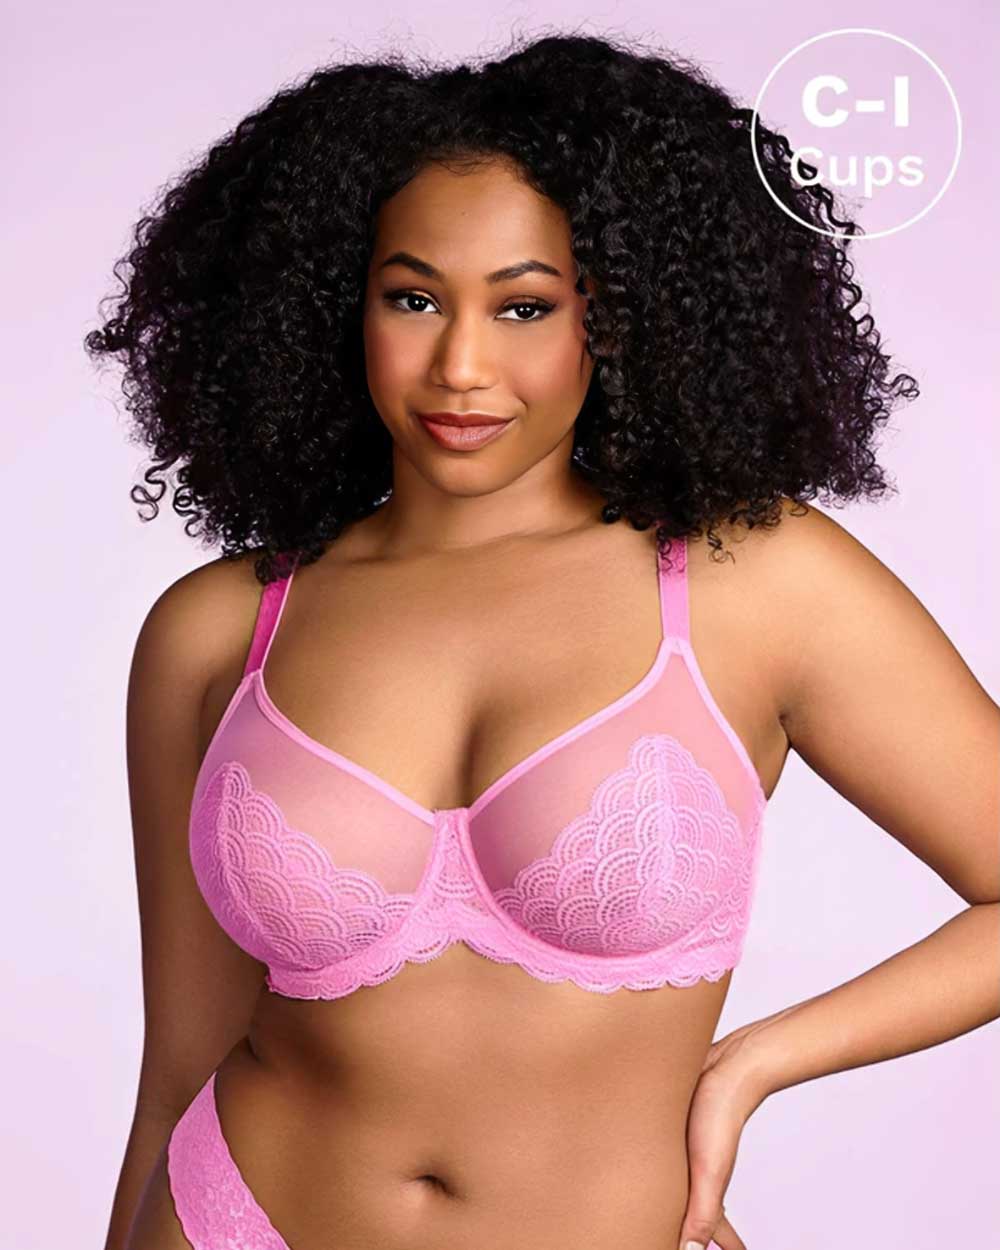 HSIA Plus Size Lingerie Clothing Brand